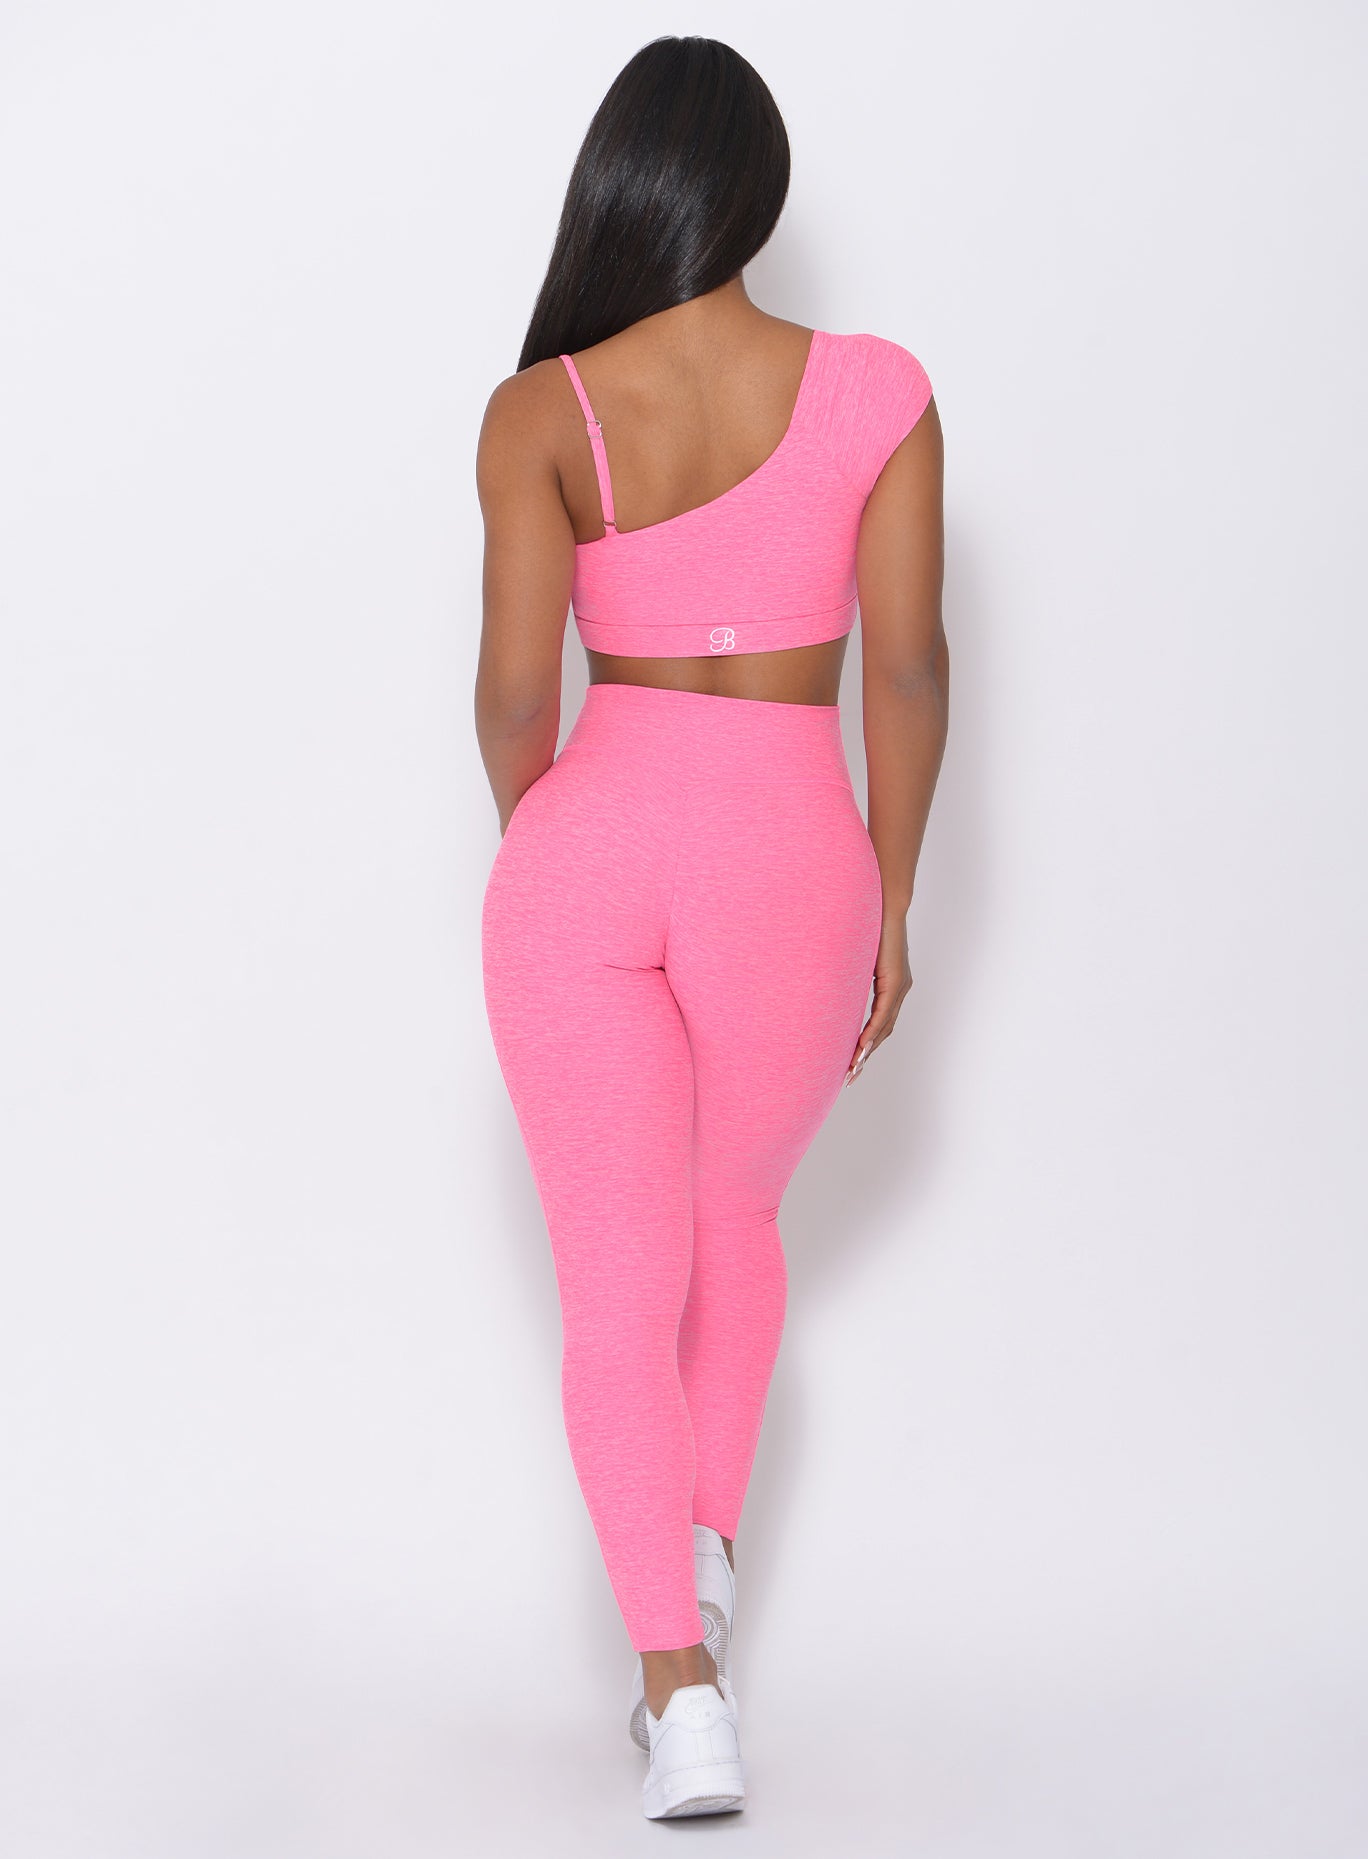 Back view of the model wearing our Adore Sports Bra in pink and a matching leggings